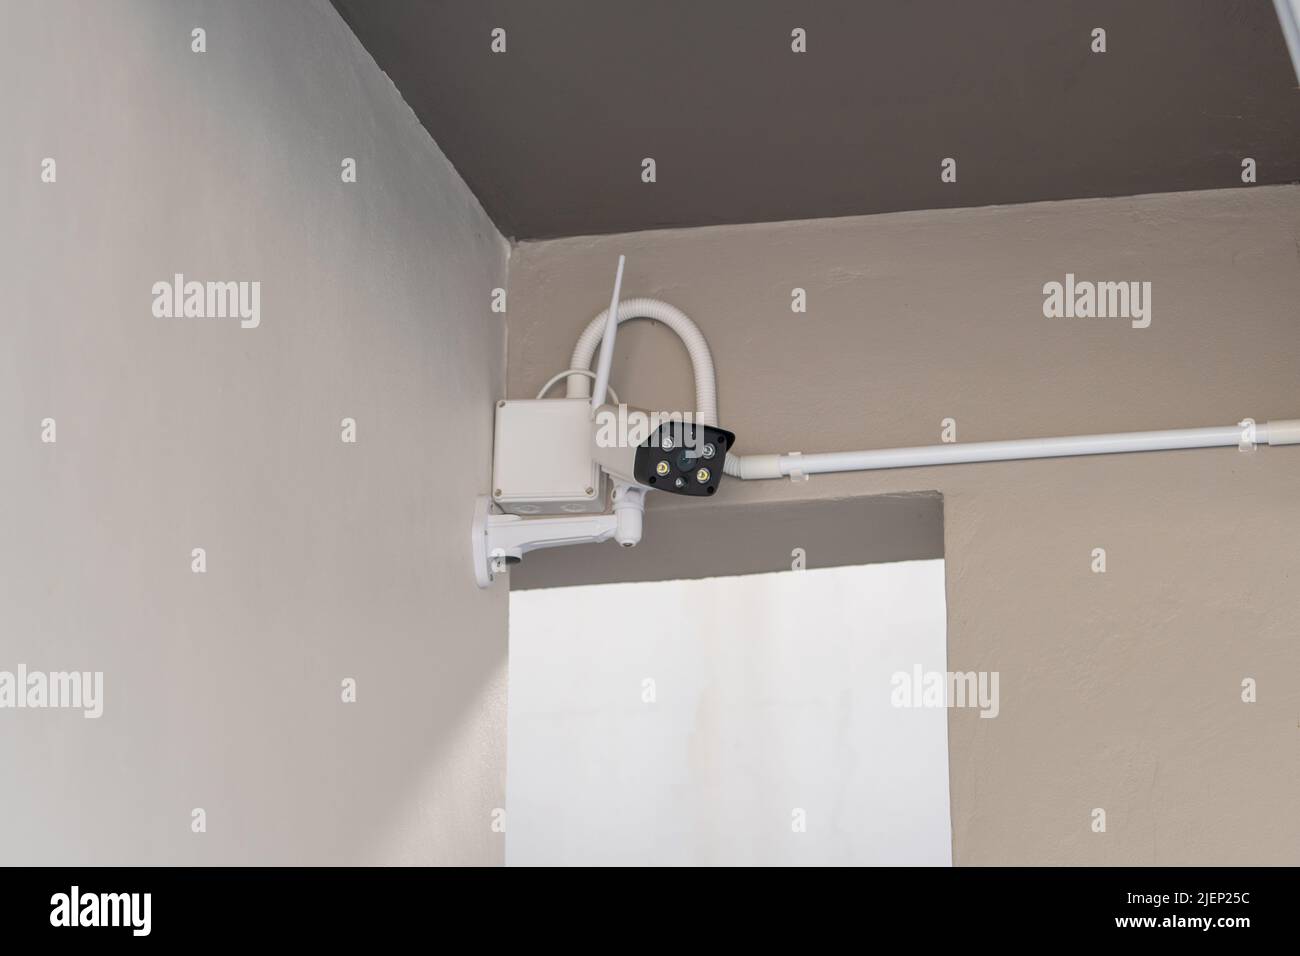 CCTV to secure building assets Stock Photo